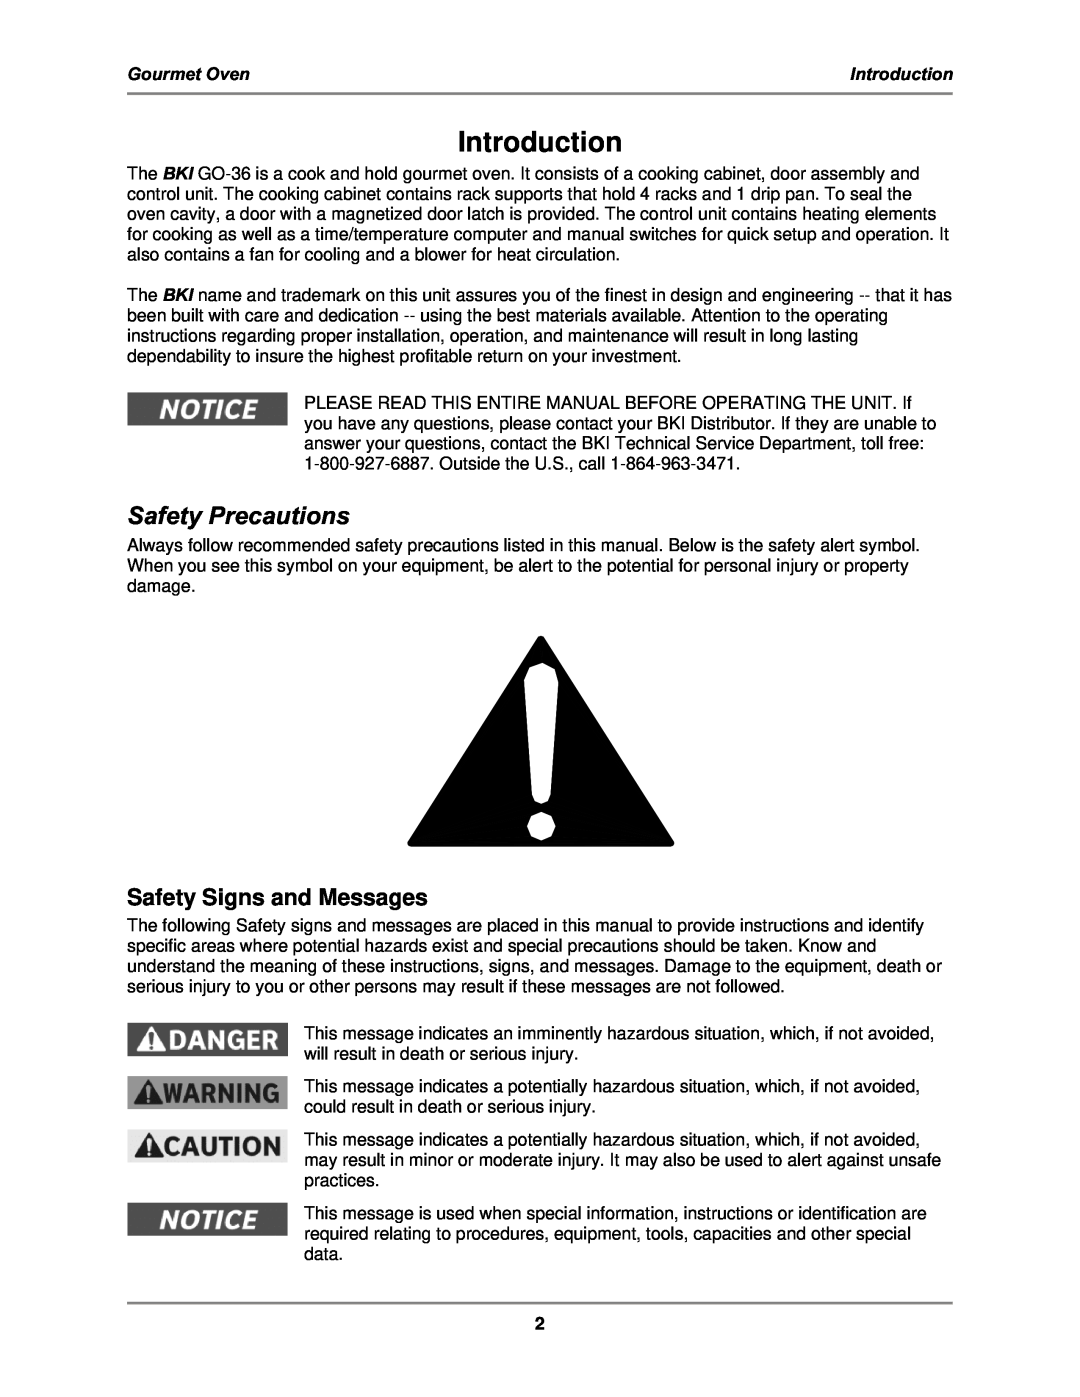 Bakers Pride Oven GO-36T operation manual Introduction, Safety Precautions, Safety Signs and Messages, Gourmet Oven 